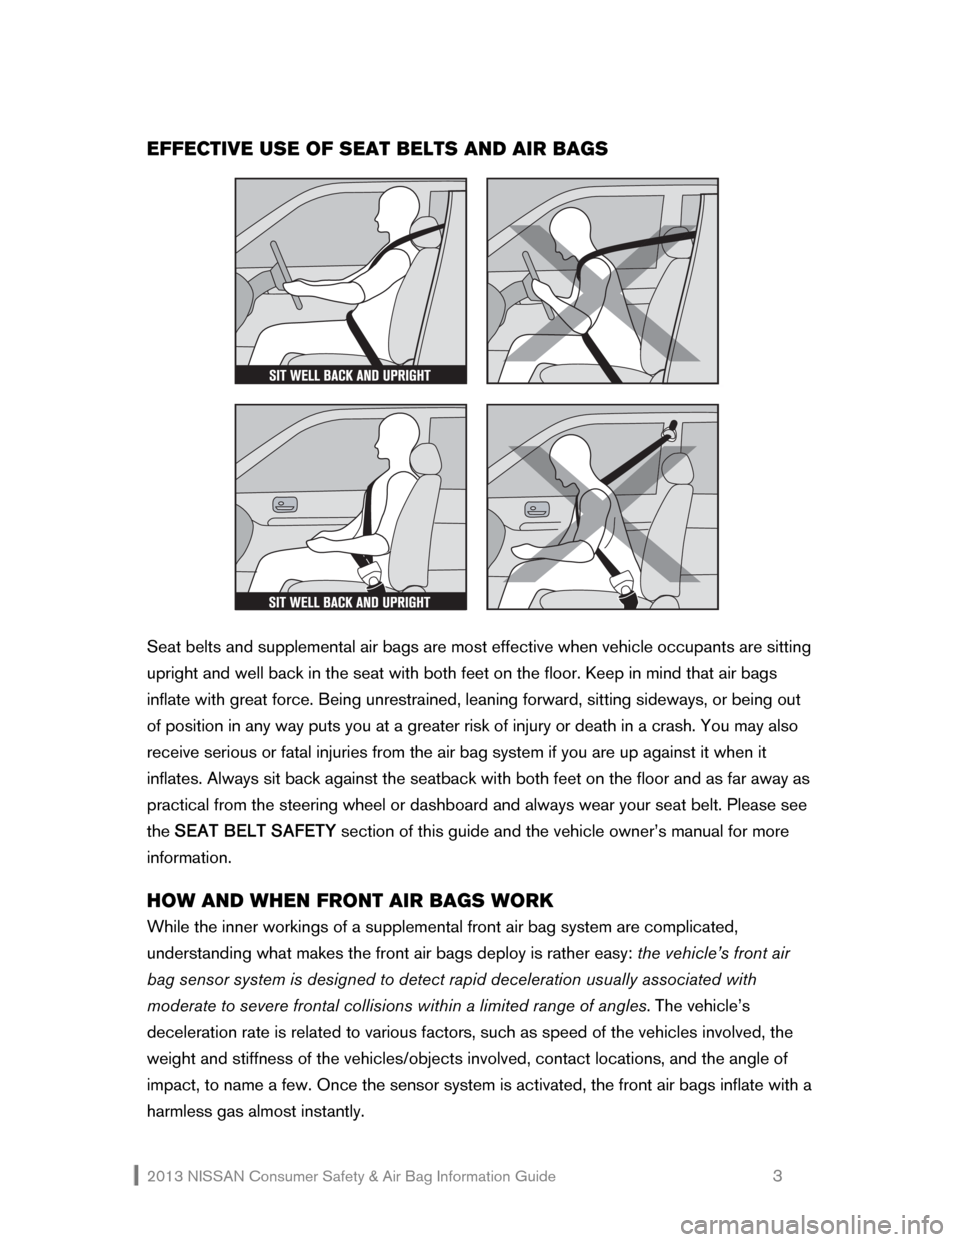 NISSAN 370Z COUPE 2013 Z34 Consumer Safety Air Bag Information Guide 2013 NISSAN Consumer Safety & Air Bag Information Guide                                                   3 
EFFECTIVE USE OF SEAT BELTS AND AIR BAGS 
 
 
 
Seat belts and supplemental air bags are mo